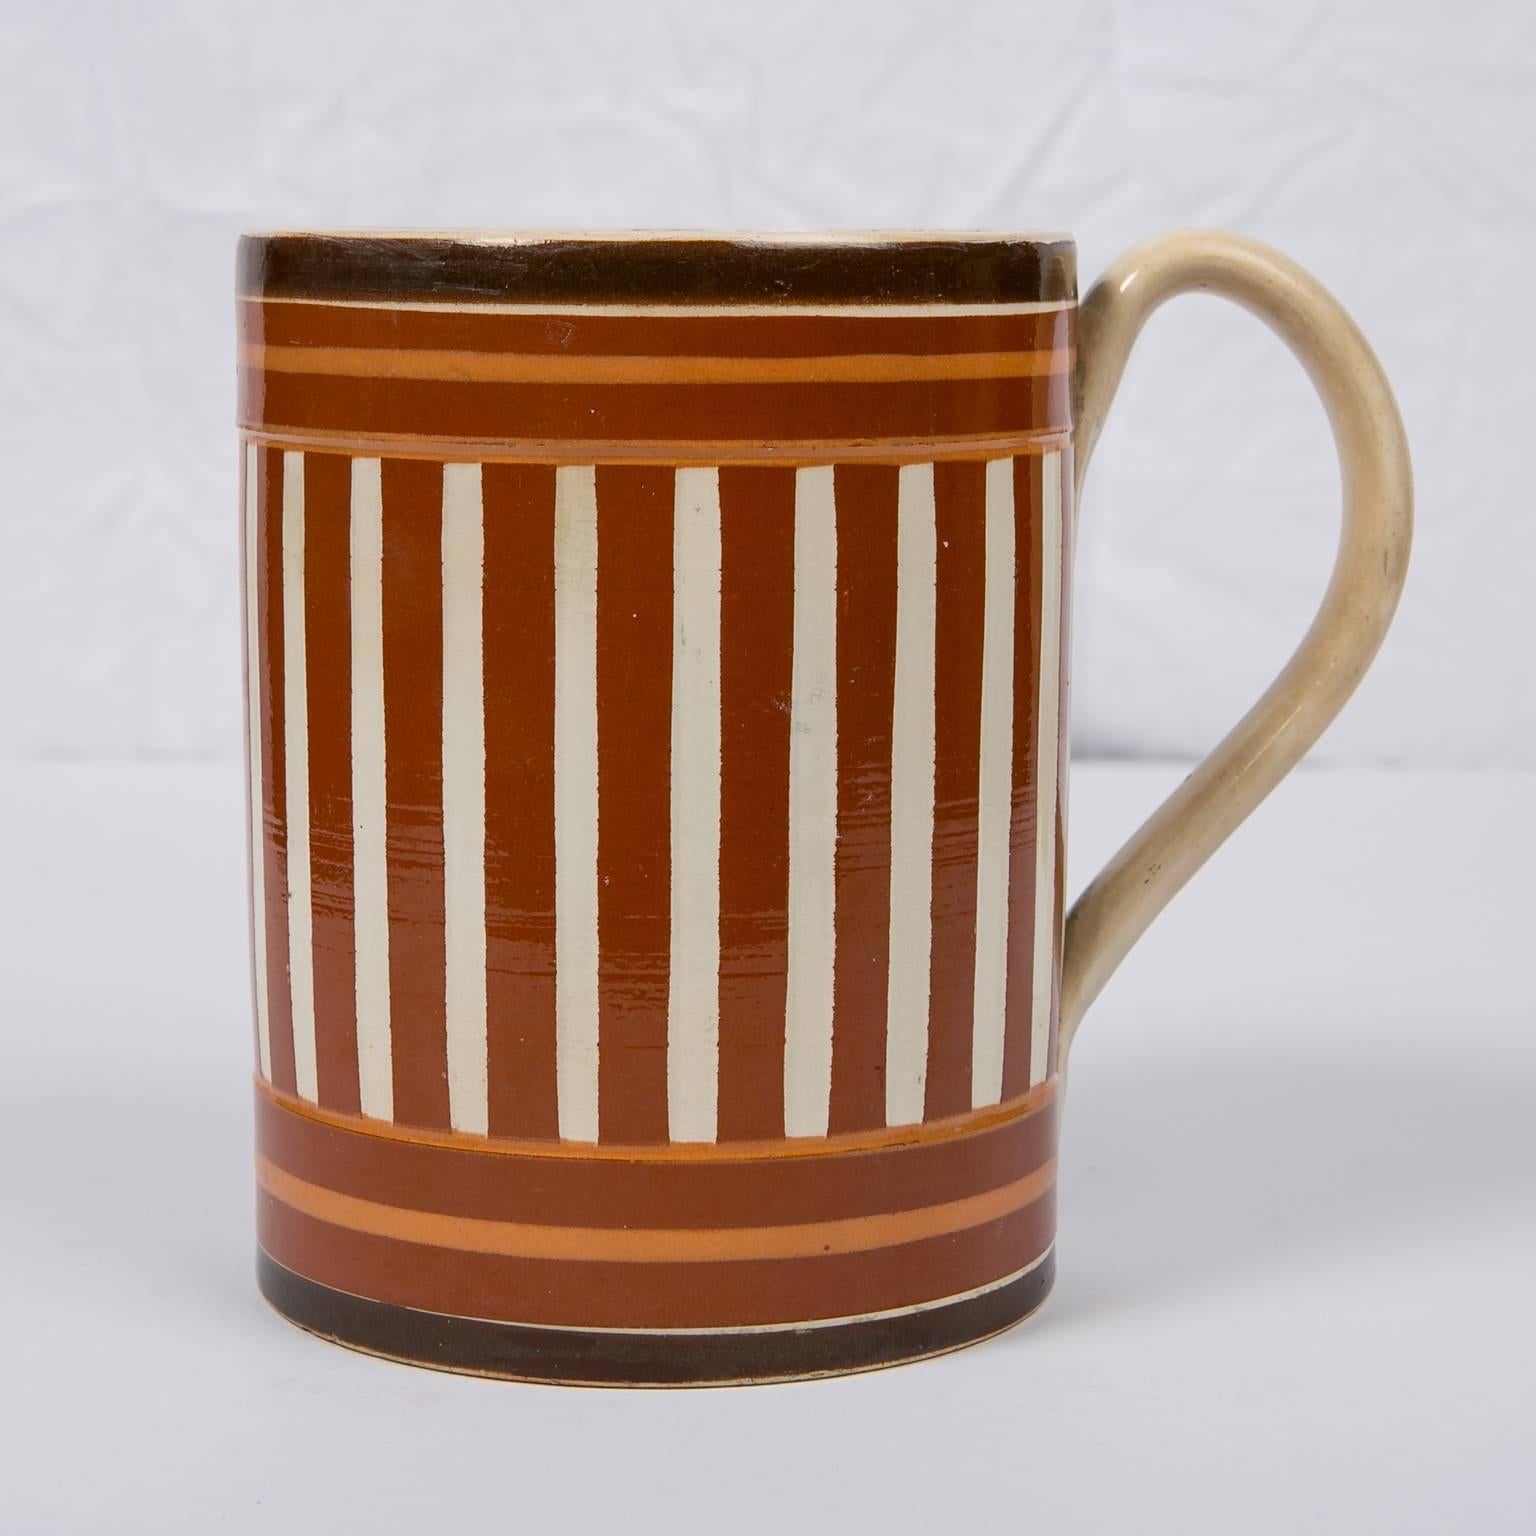 This antique creamware mochaware mug or tankard is slip decorated with both vertical and horizontal stripes in three shades of brown. No two mochaware pieces are the same. Each potter made his own choices in color and design. What makes this mug so